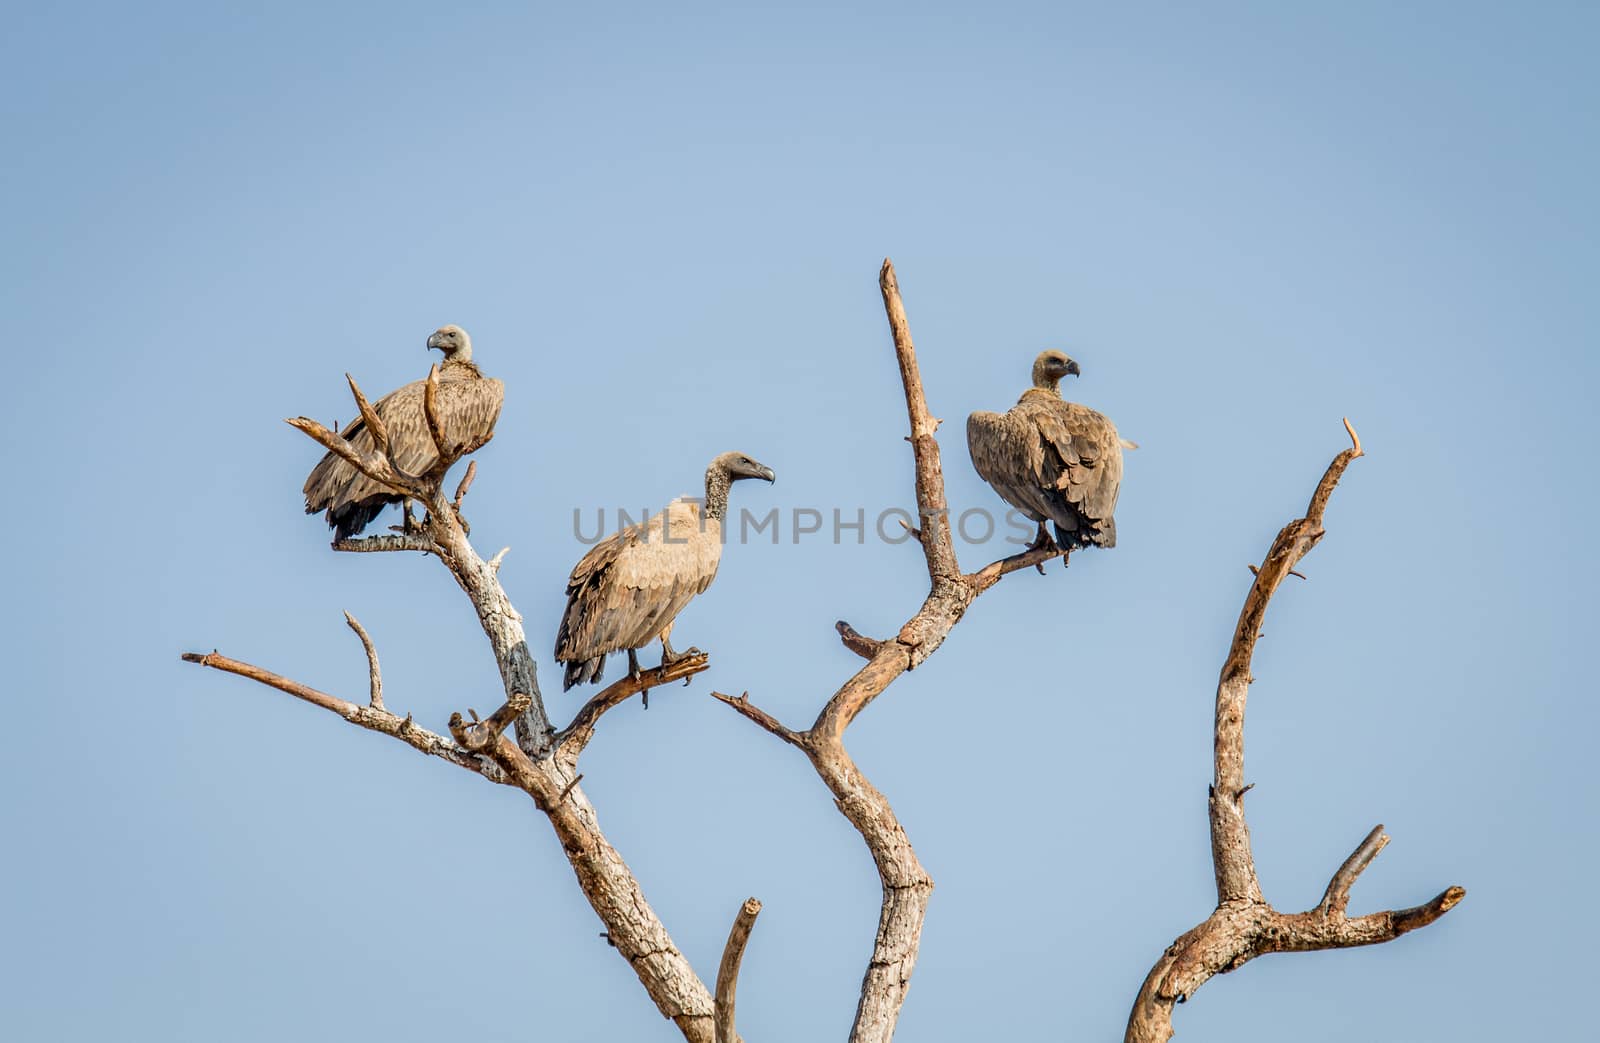 White-backed Vultures in a tree in the Kruger National Park, South Africa.